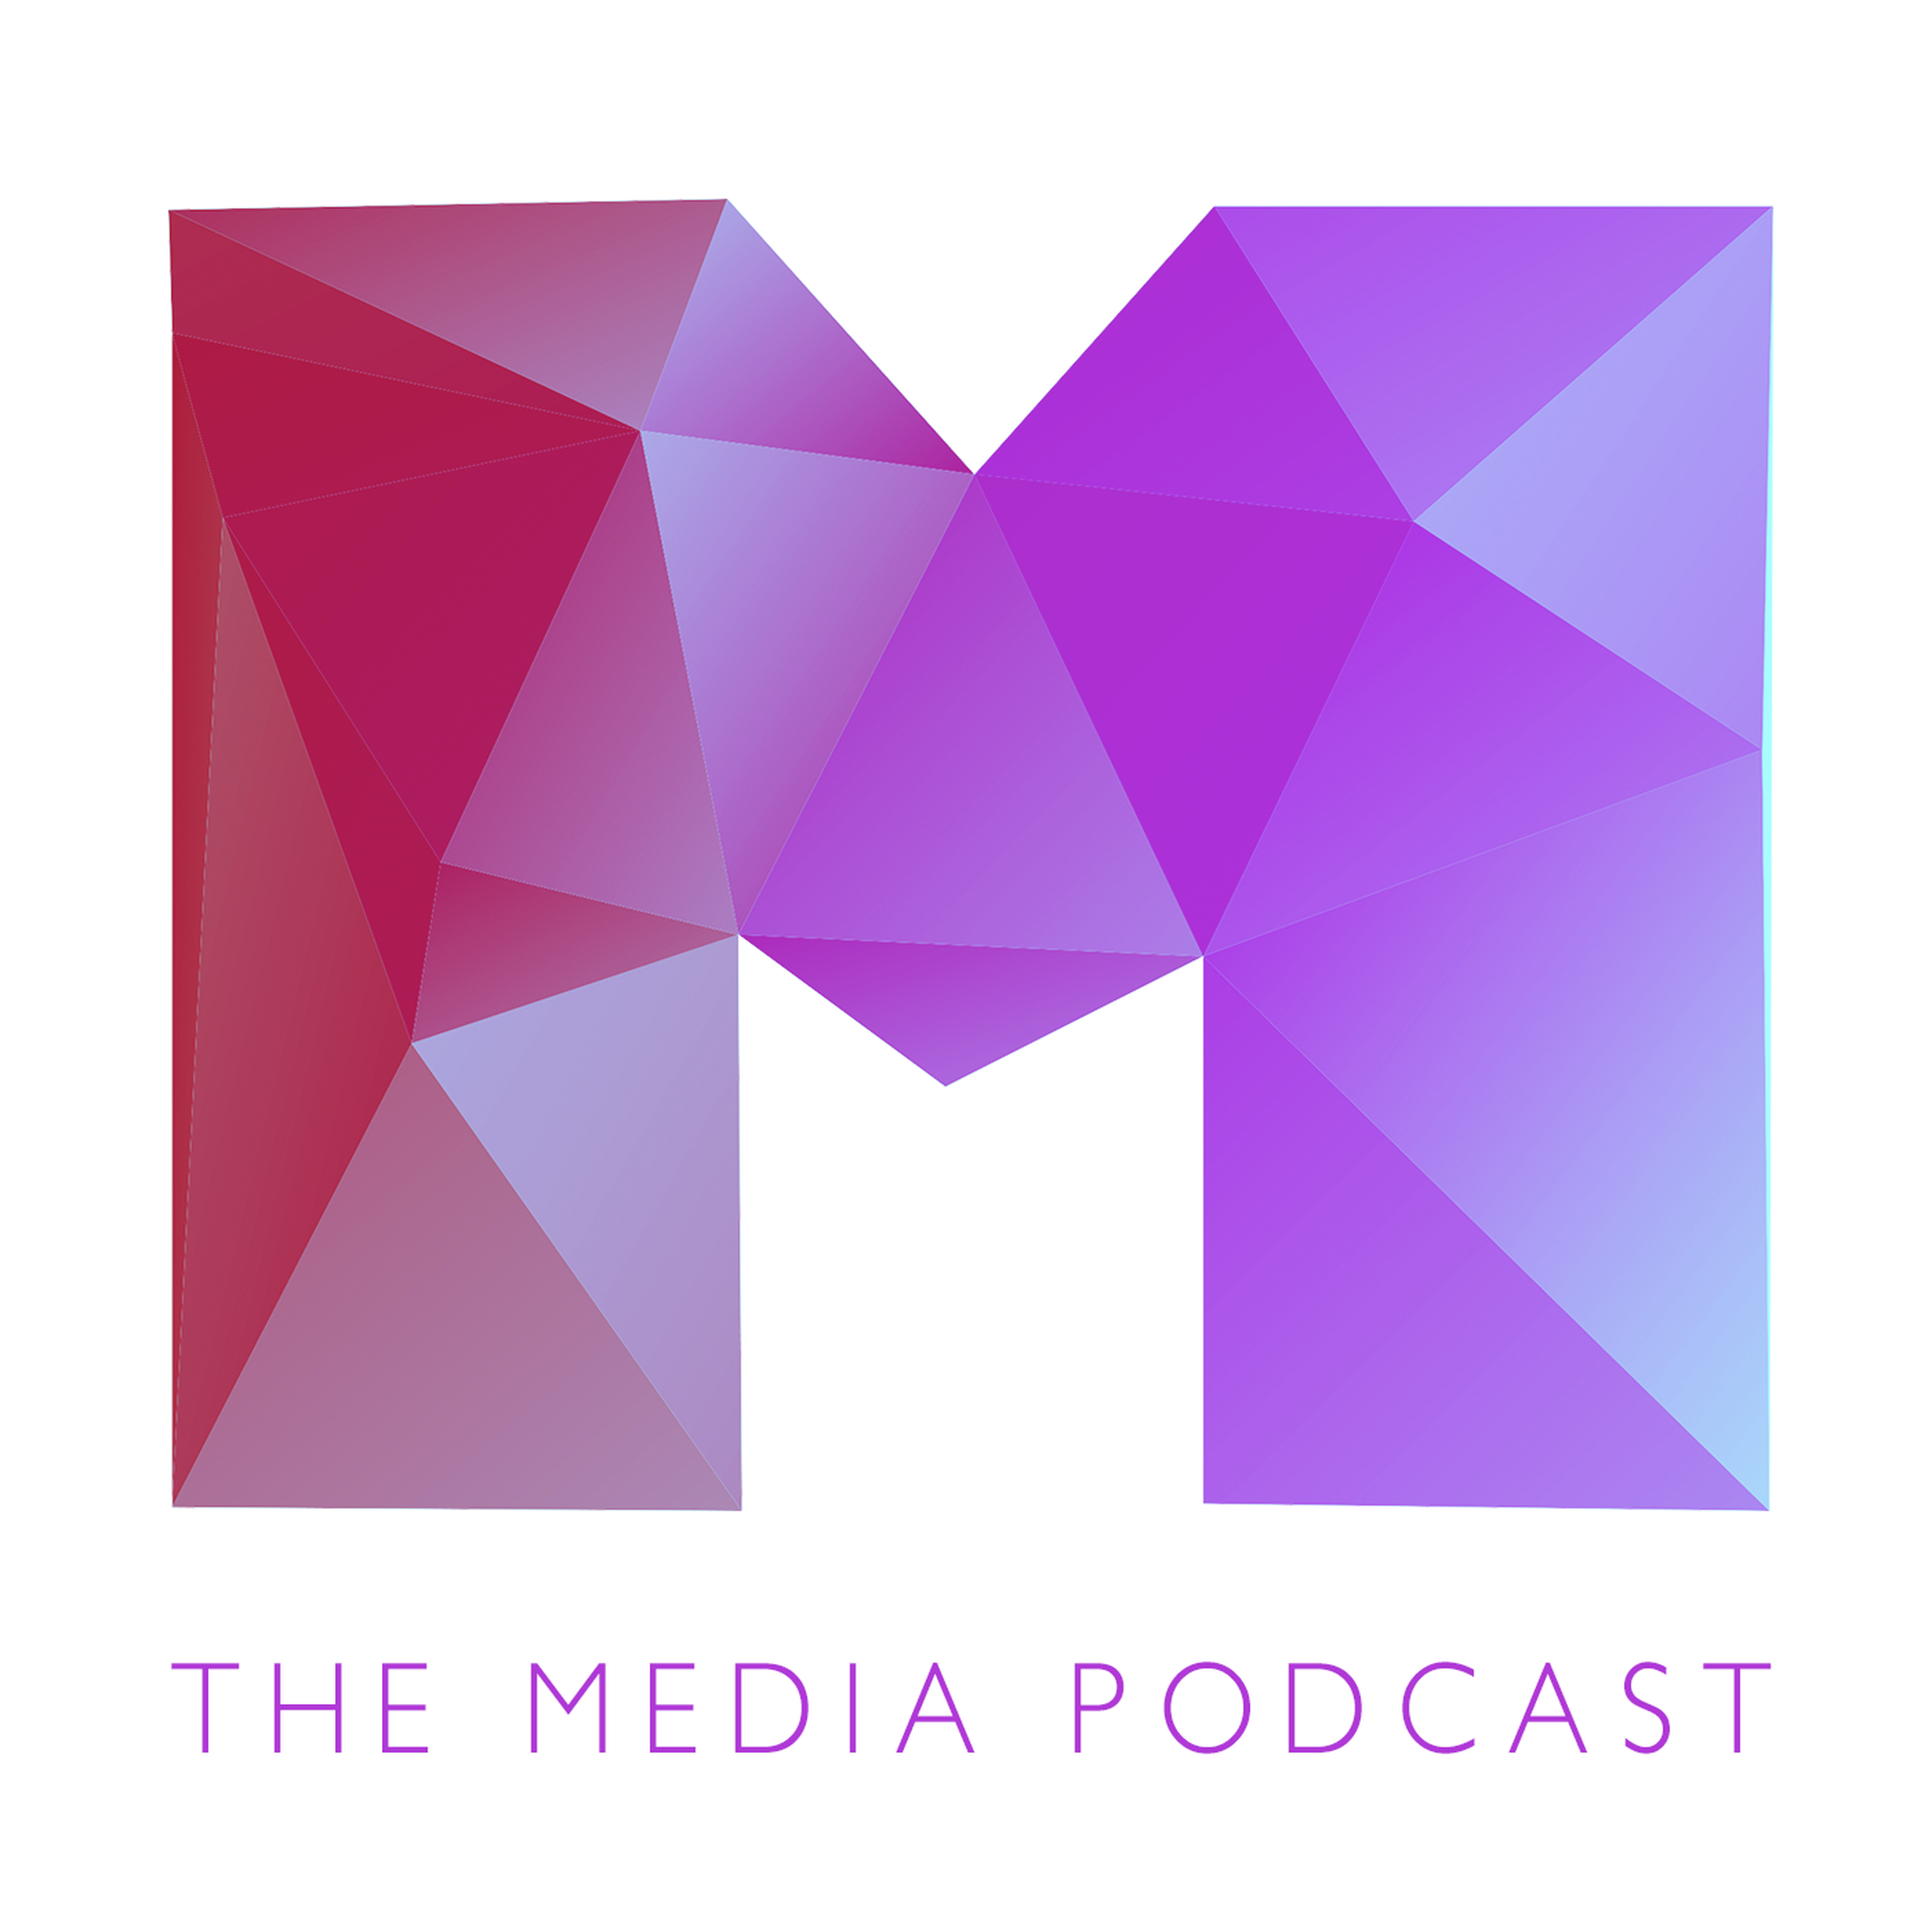 #15 - RAJARS, Vice Media plans, Whisper scoop - The Media Podcast with Olly Mann